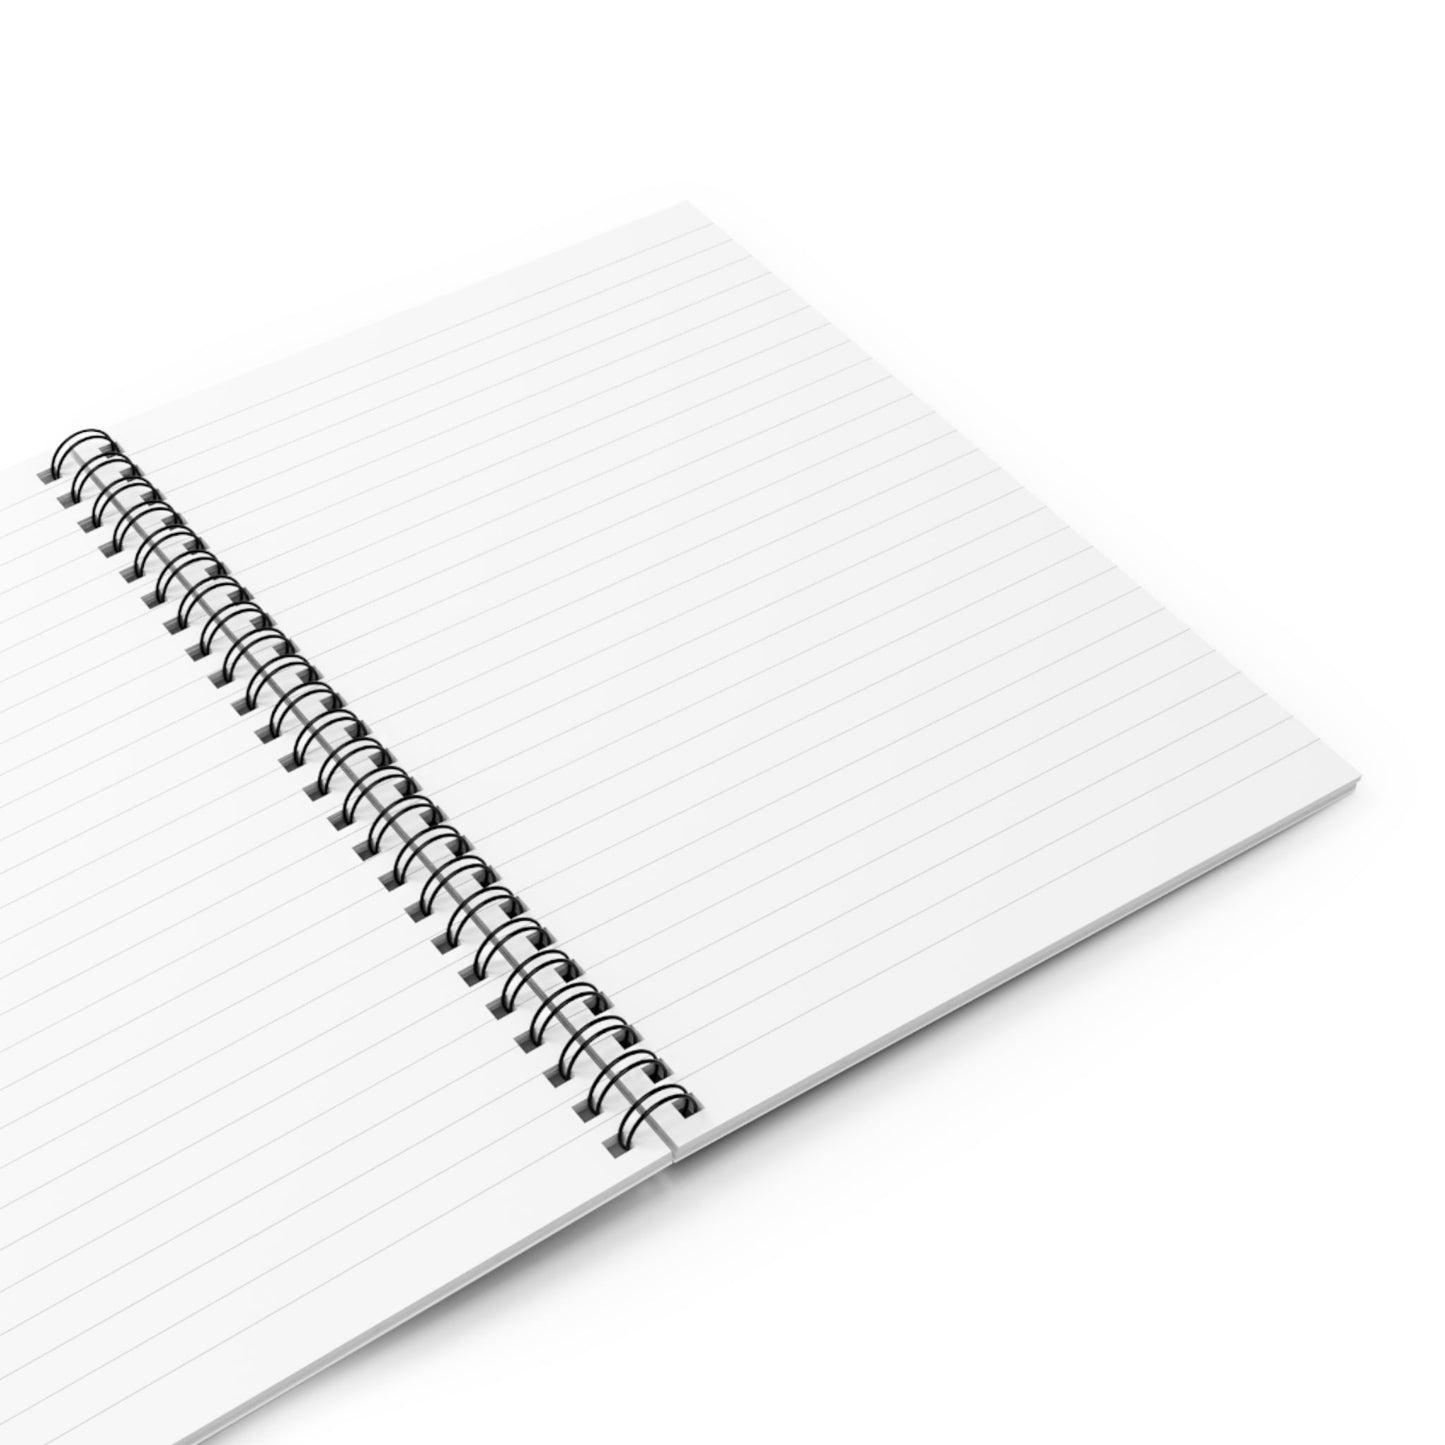 Spiral Notebook with The Gateway Cover Opened with Blank White College Ruled Pages